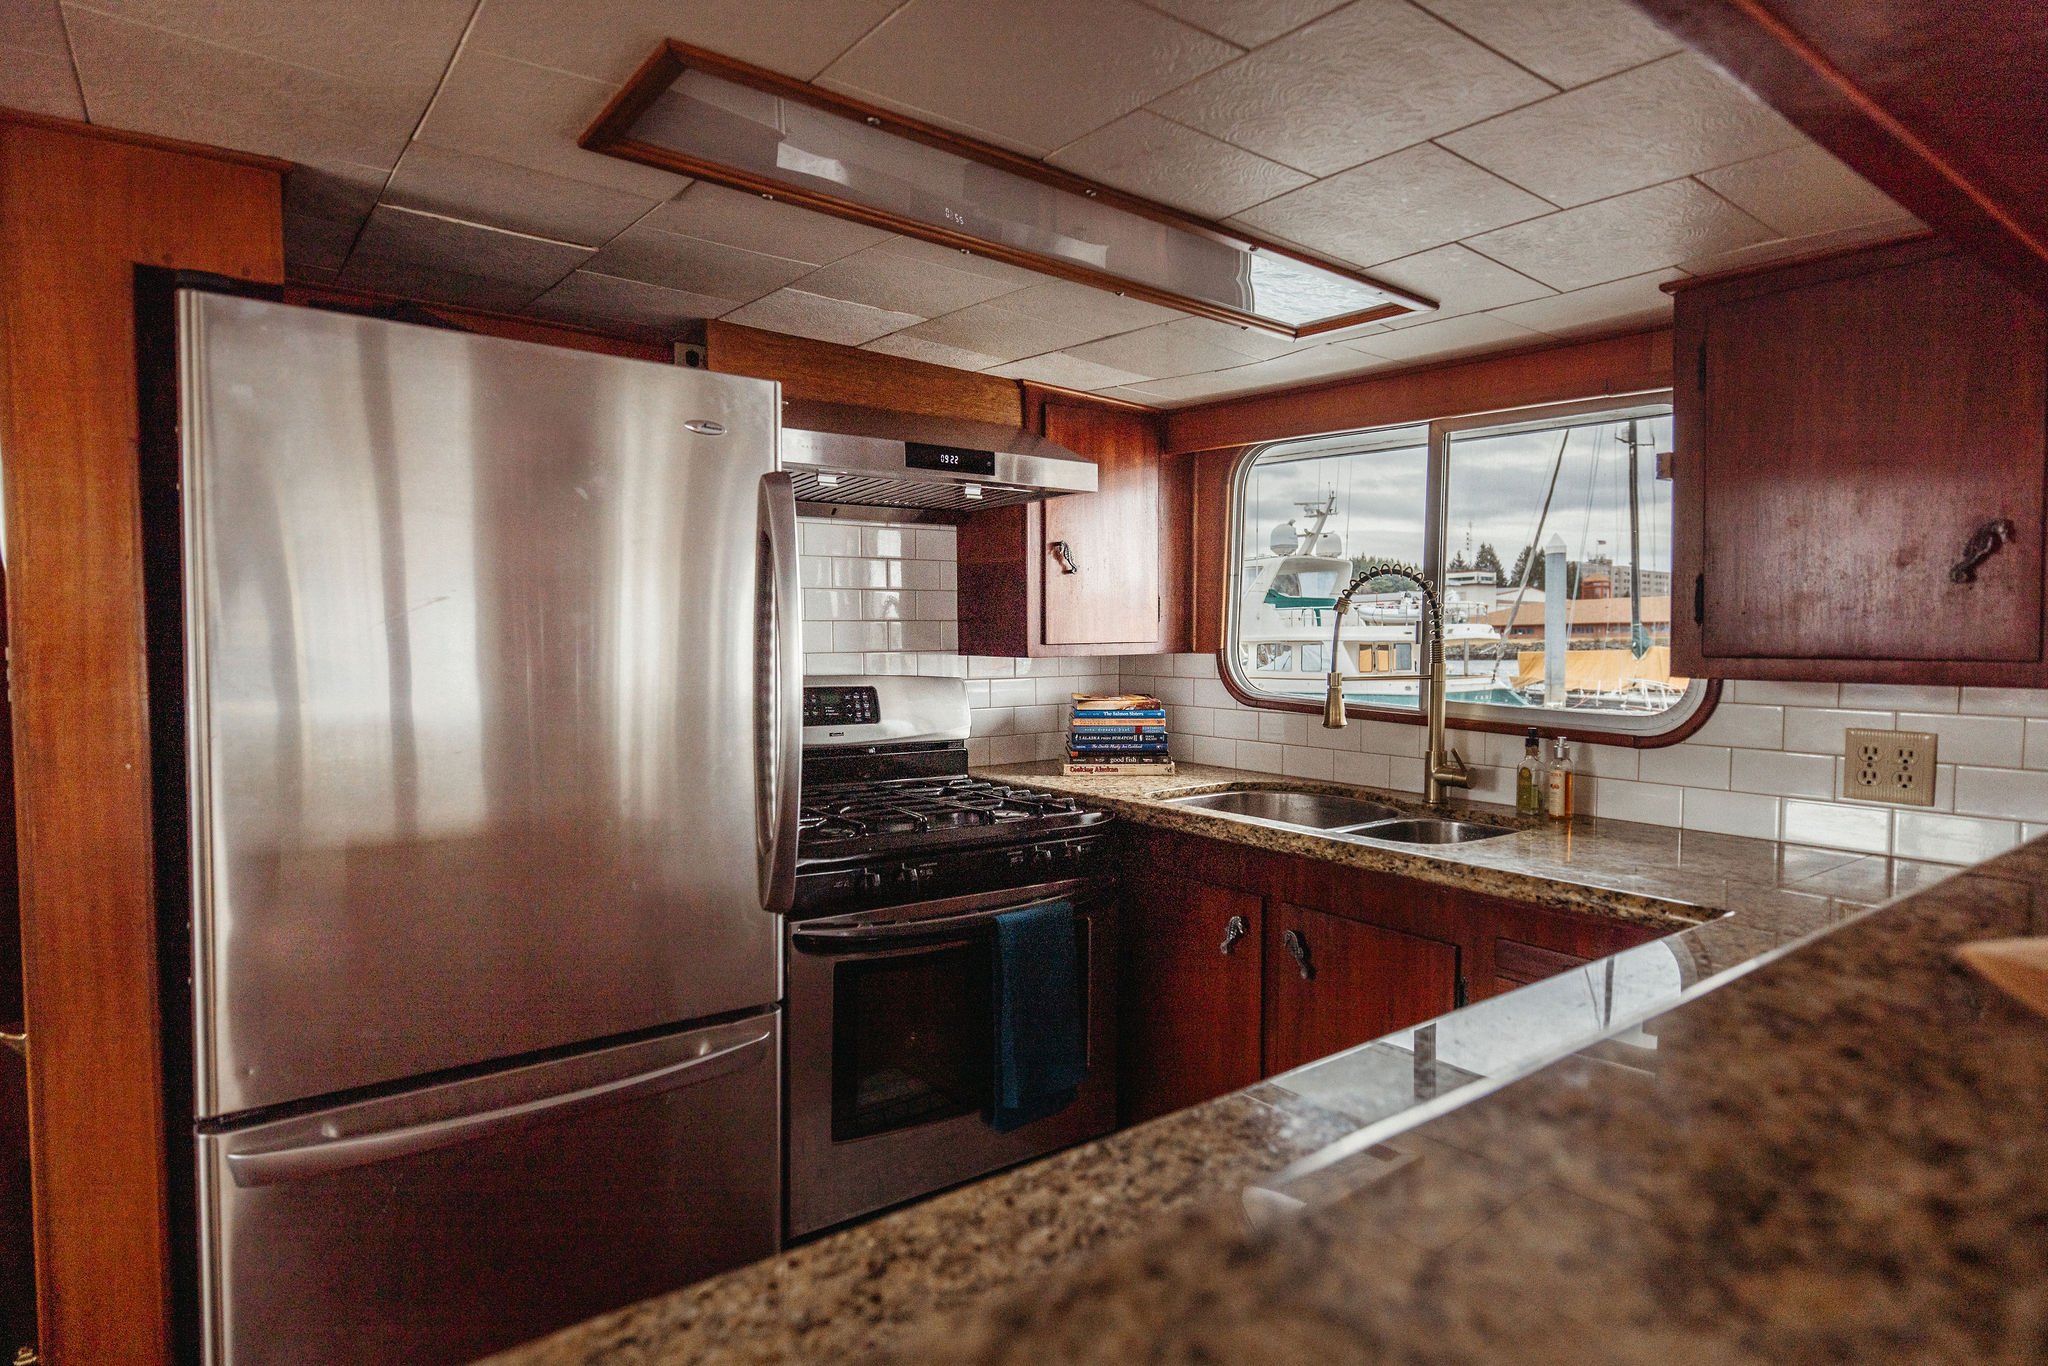 Galley of the Silver Lady with stainless steel fridge, gas cooktop and granite counters.